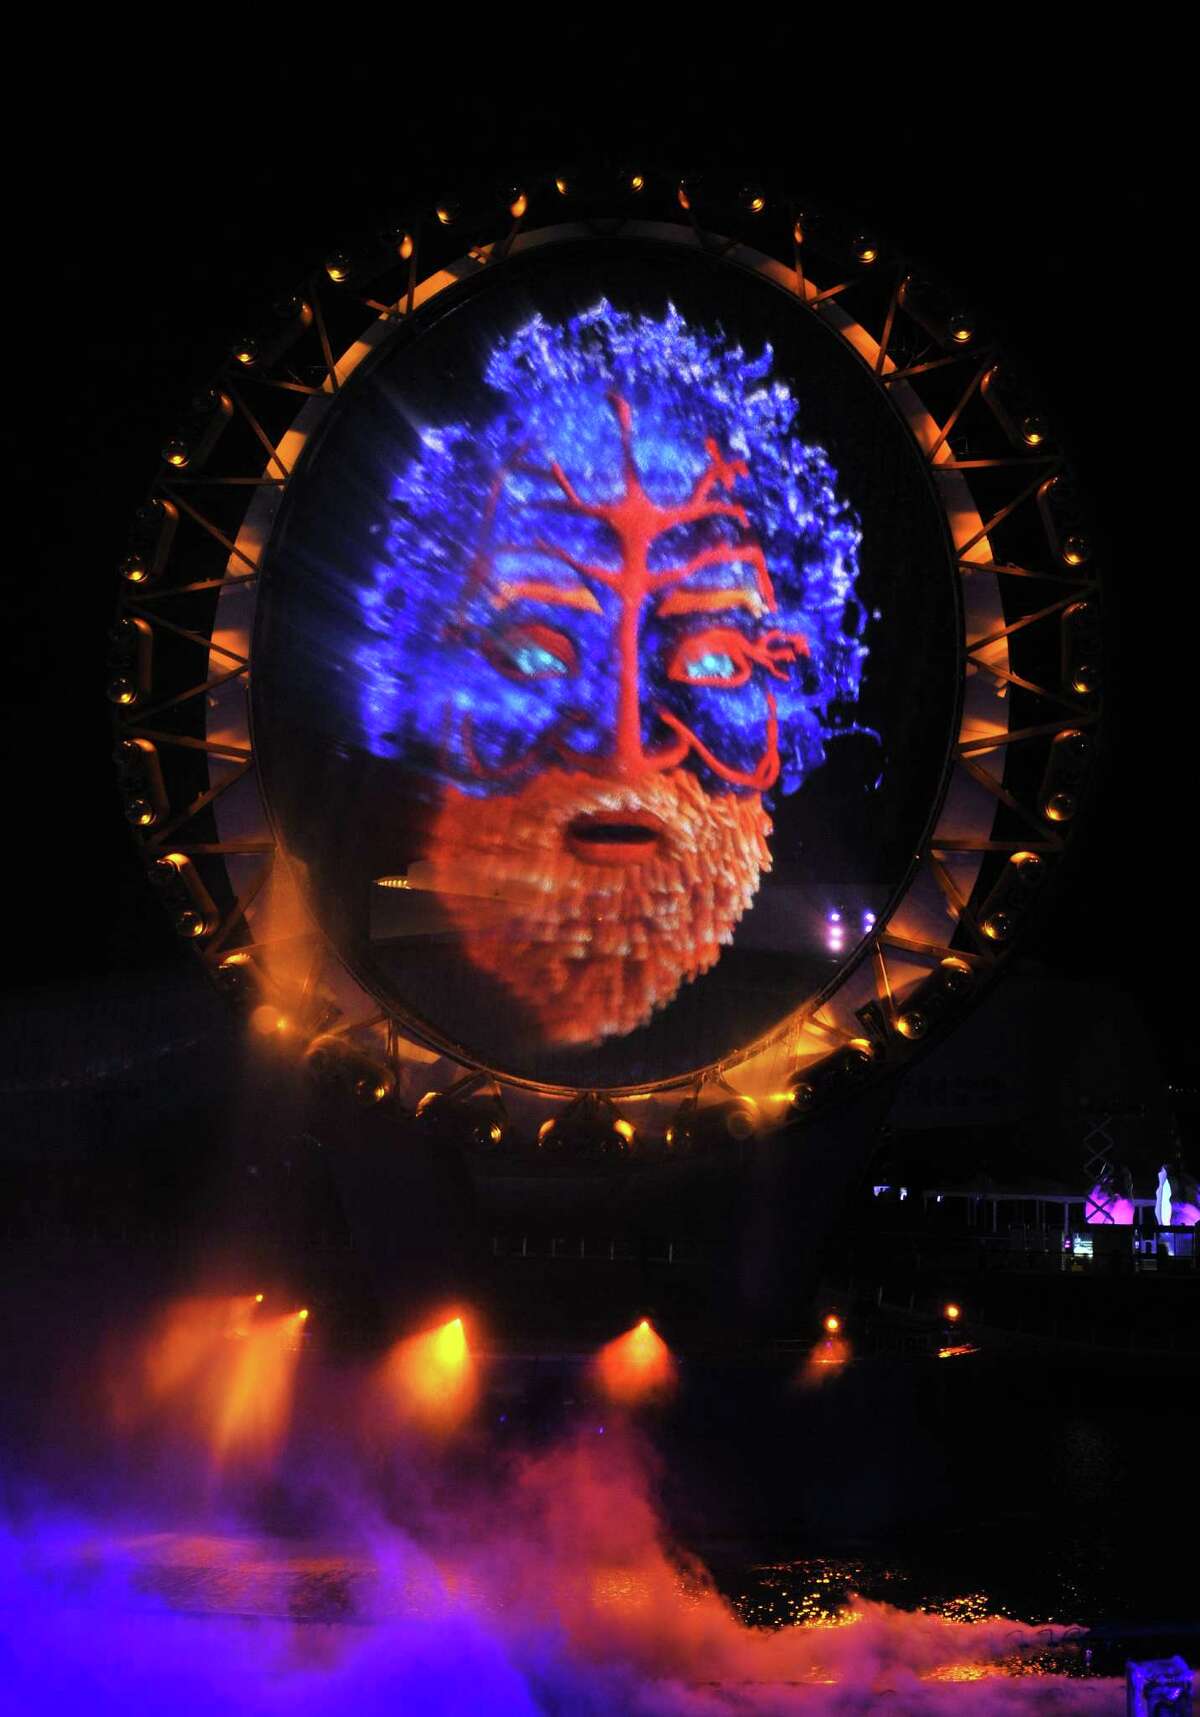 The Big-O, a giant circular structure for nightly laser and light shows, is seen lit up during the opening ceremony of the Expo 2012 in Yeosu, a small city on South Korea's south coast, on May 11, 2012. After four years of work and 10 billion USD in investment, an international expo will start on May 12 at a glittering hi-tech venue on the site of a former dusty cement terminal in South Korea under the theme of "The Living Ocean and Coast". AFP PHOTO / JUNG YEON-JEJUNG YEON-JE/AFP/GettyImages